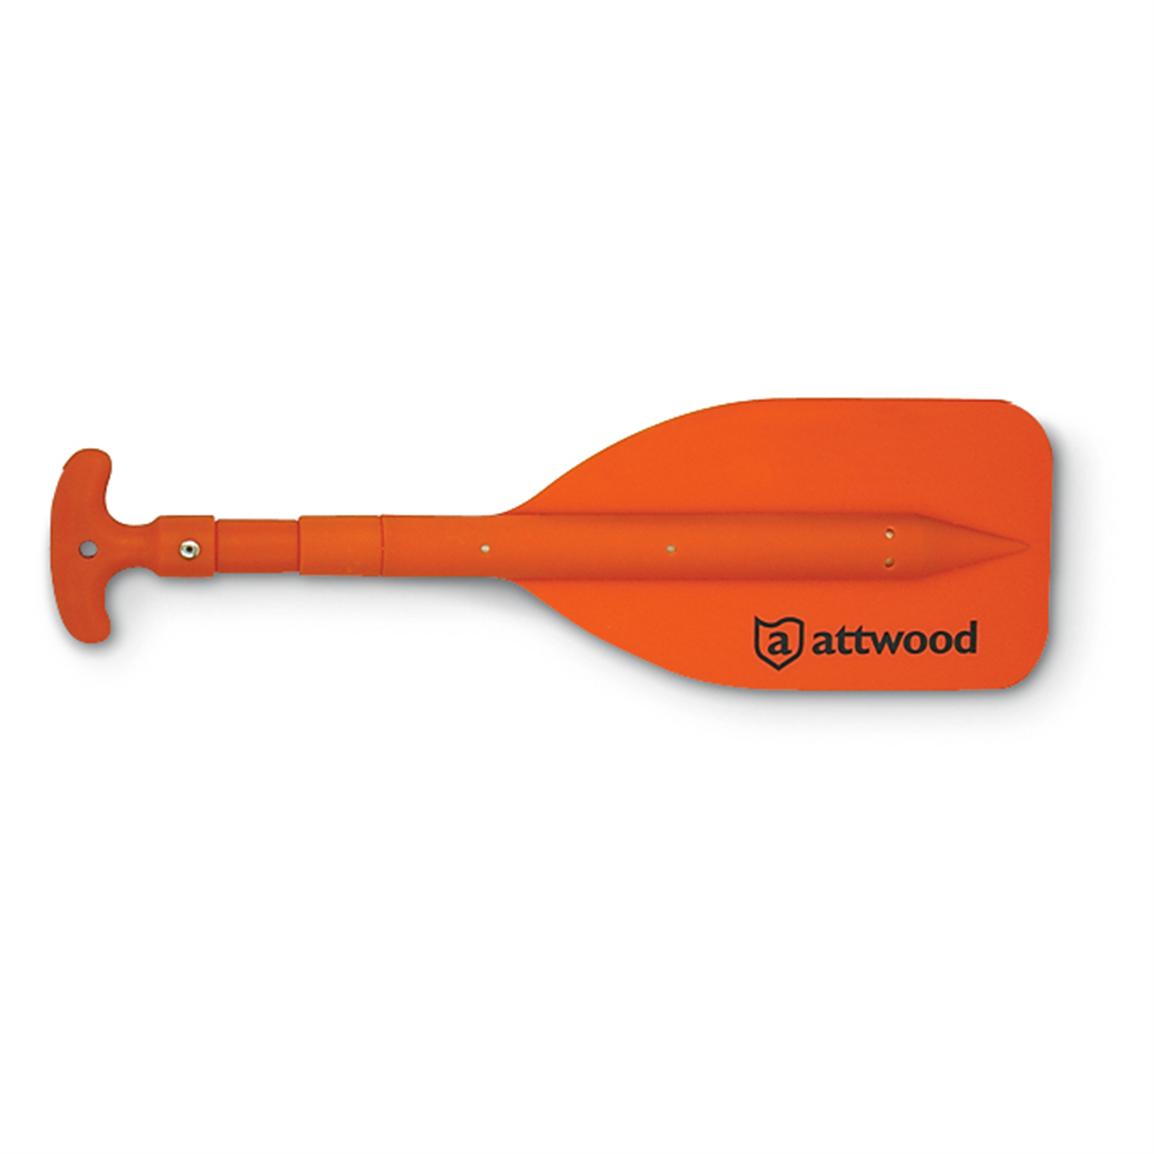 Attwood Telescoping Boat Paddle